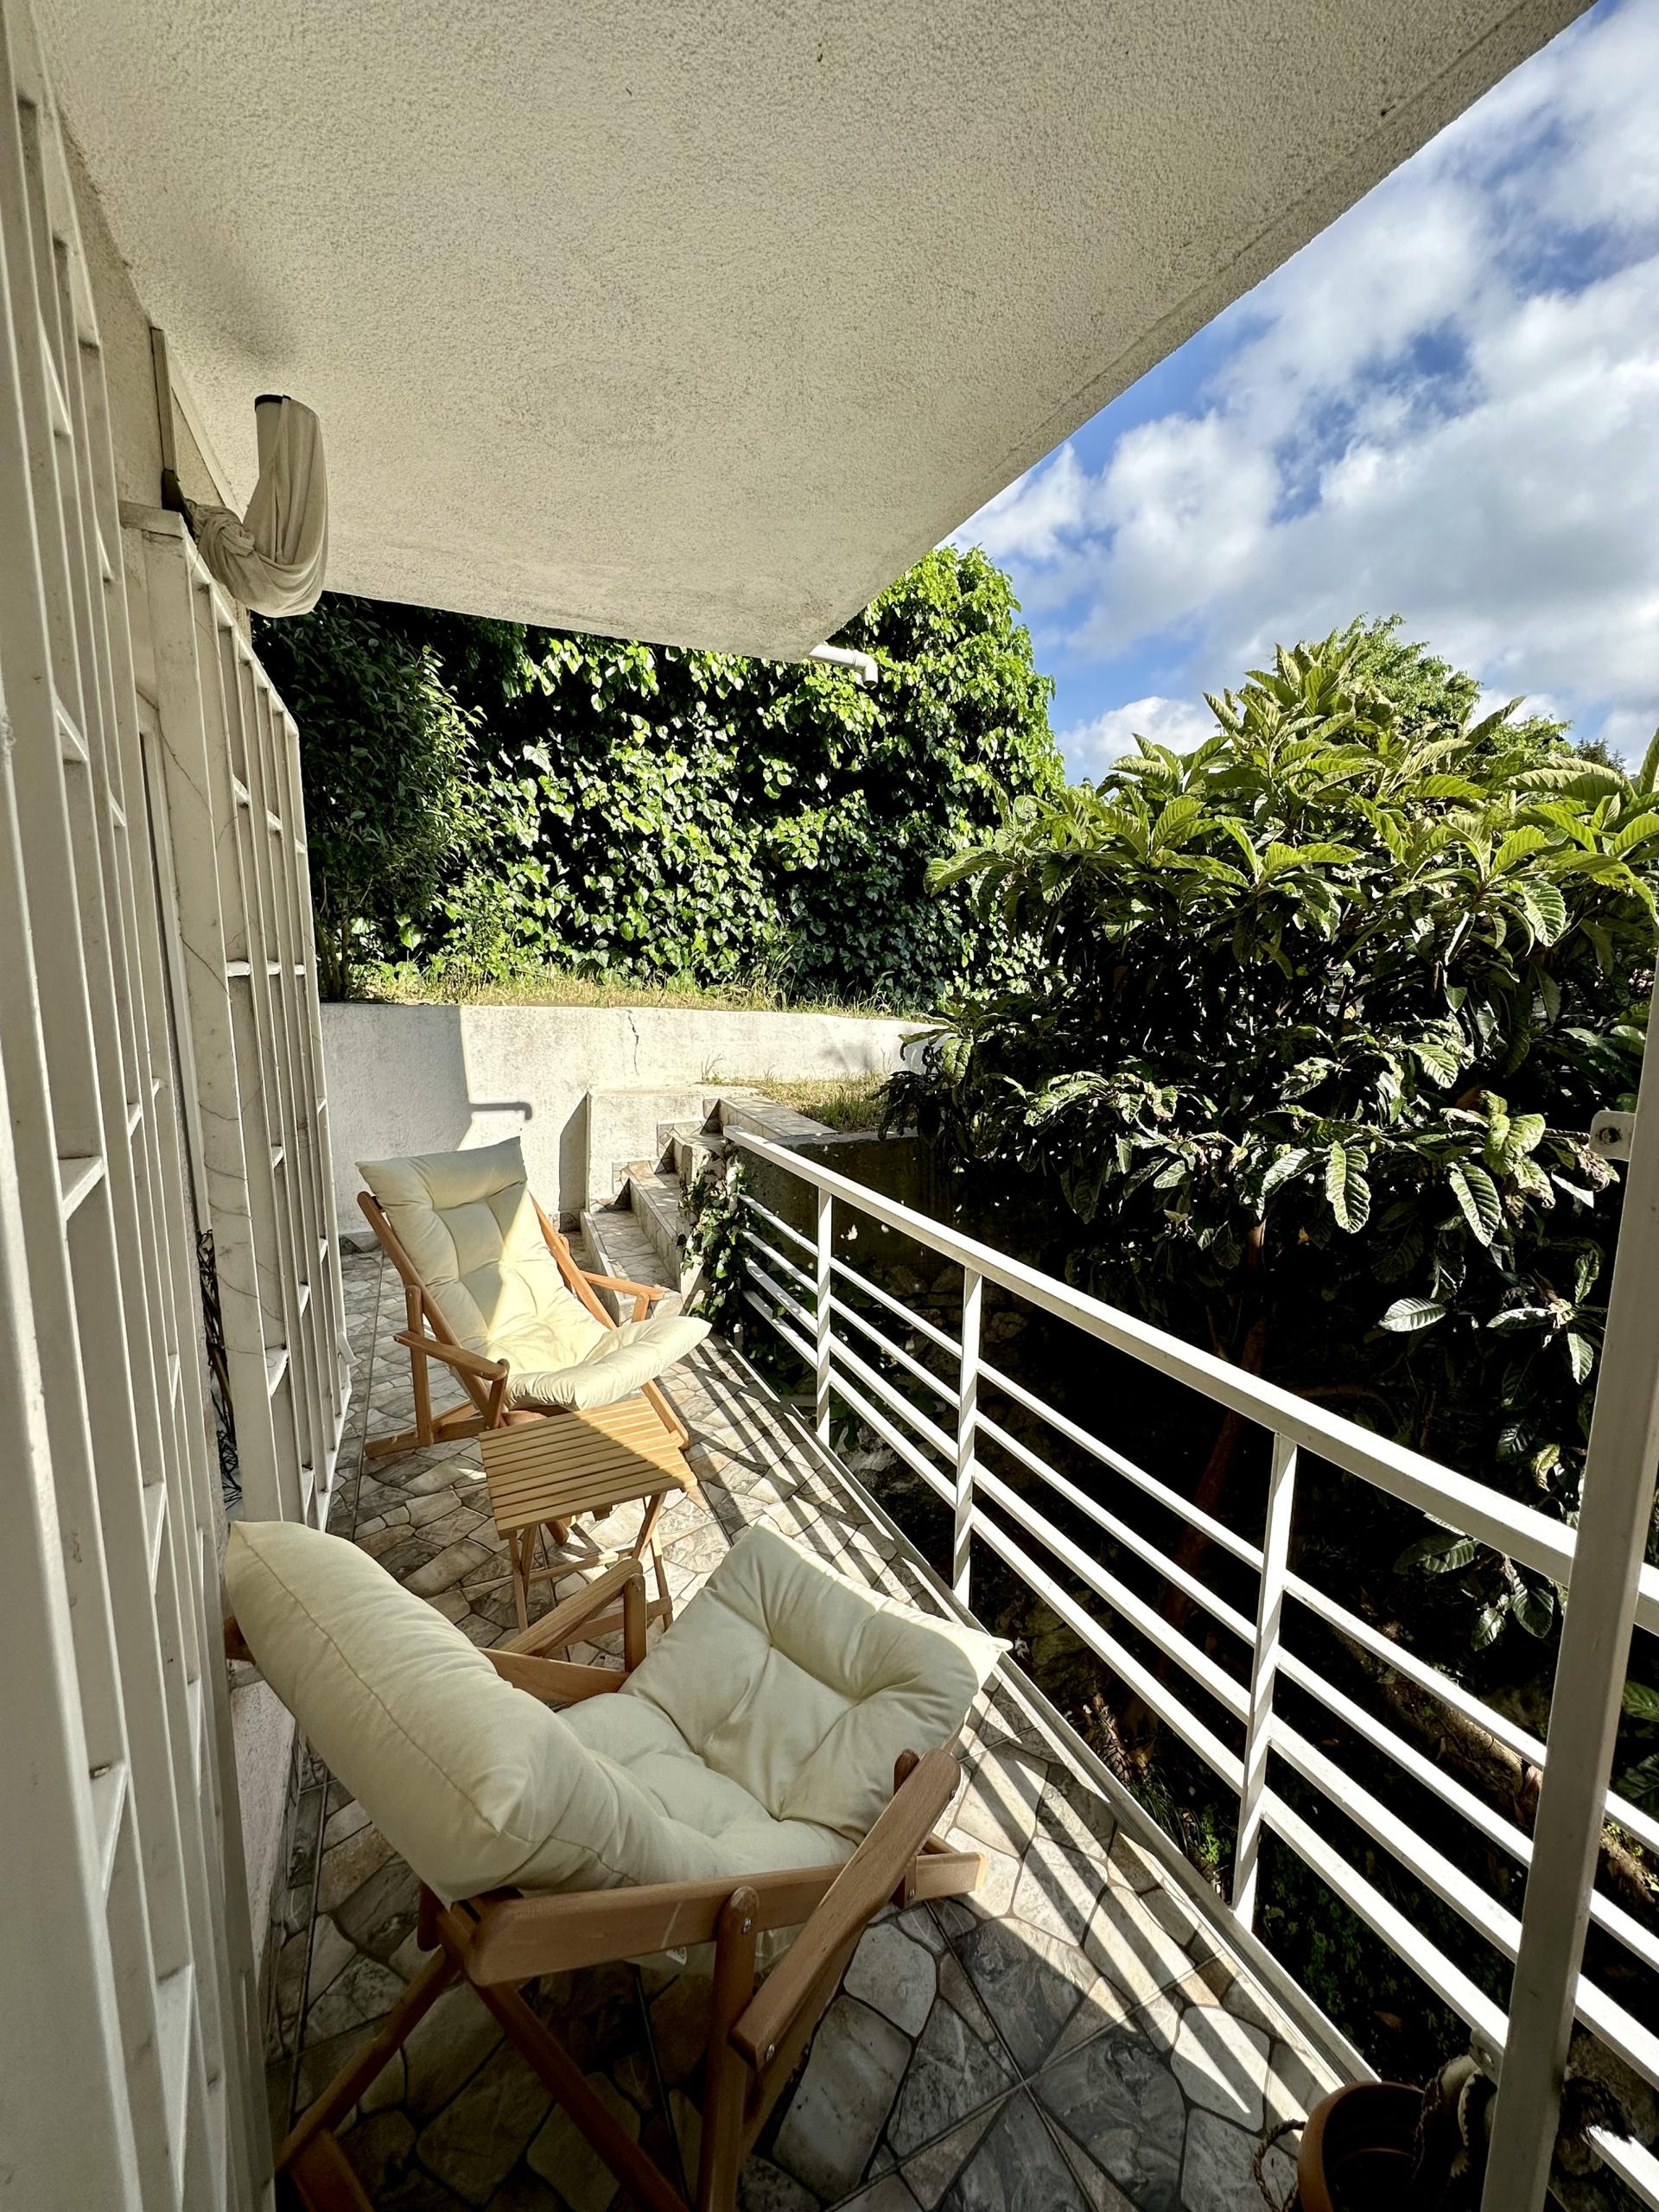 A refreshing balcony for you, hidden by the blue sky and lush trees…